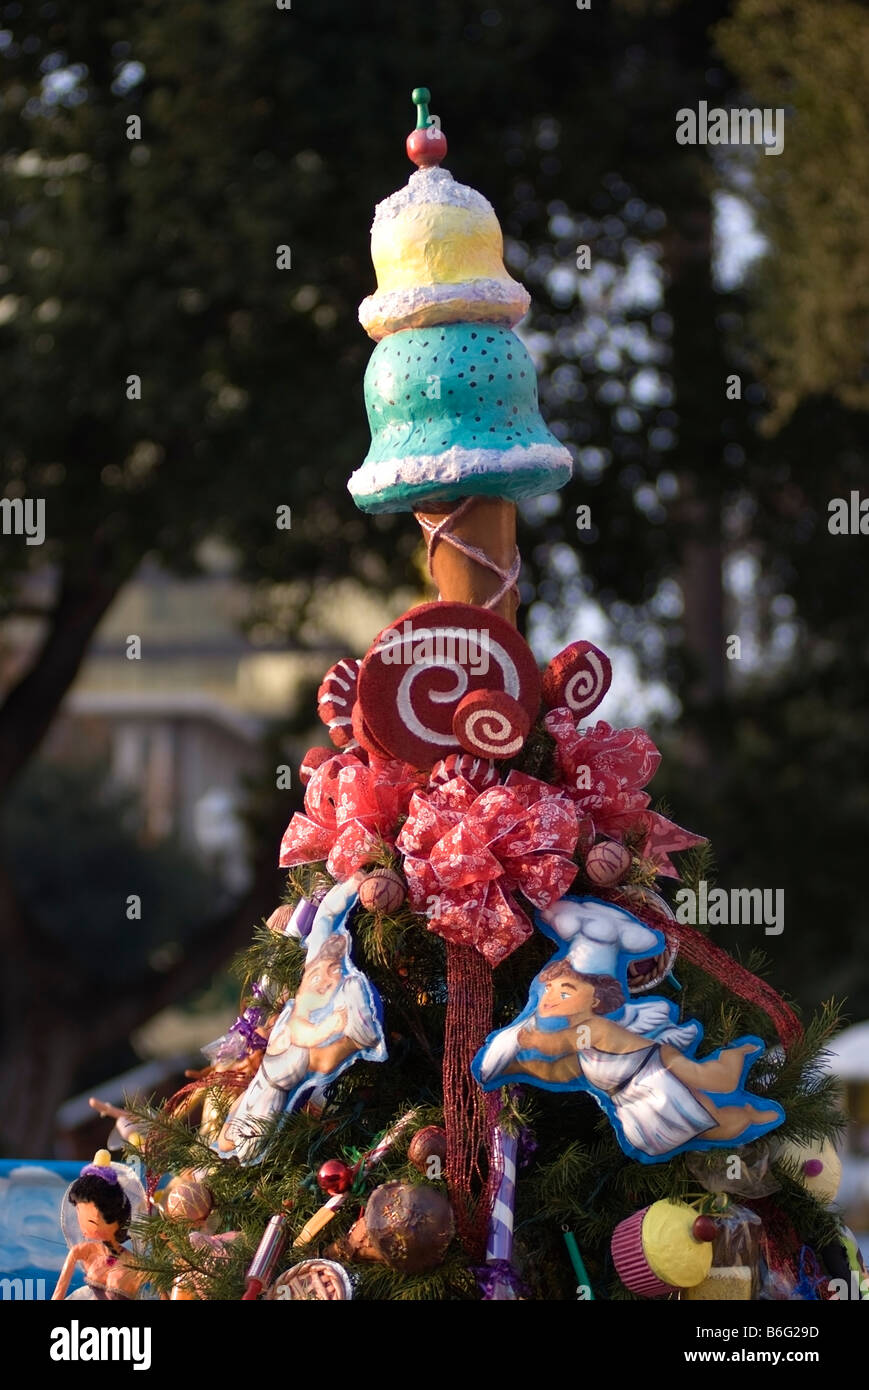 Christmas tree topped with an ice cream cone at Christmas in the Park in the Plaza de Cesar Chavez in central San Jose, CA. Stock Photo